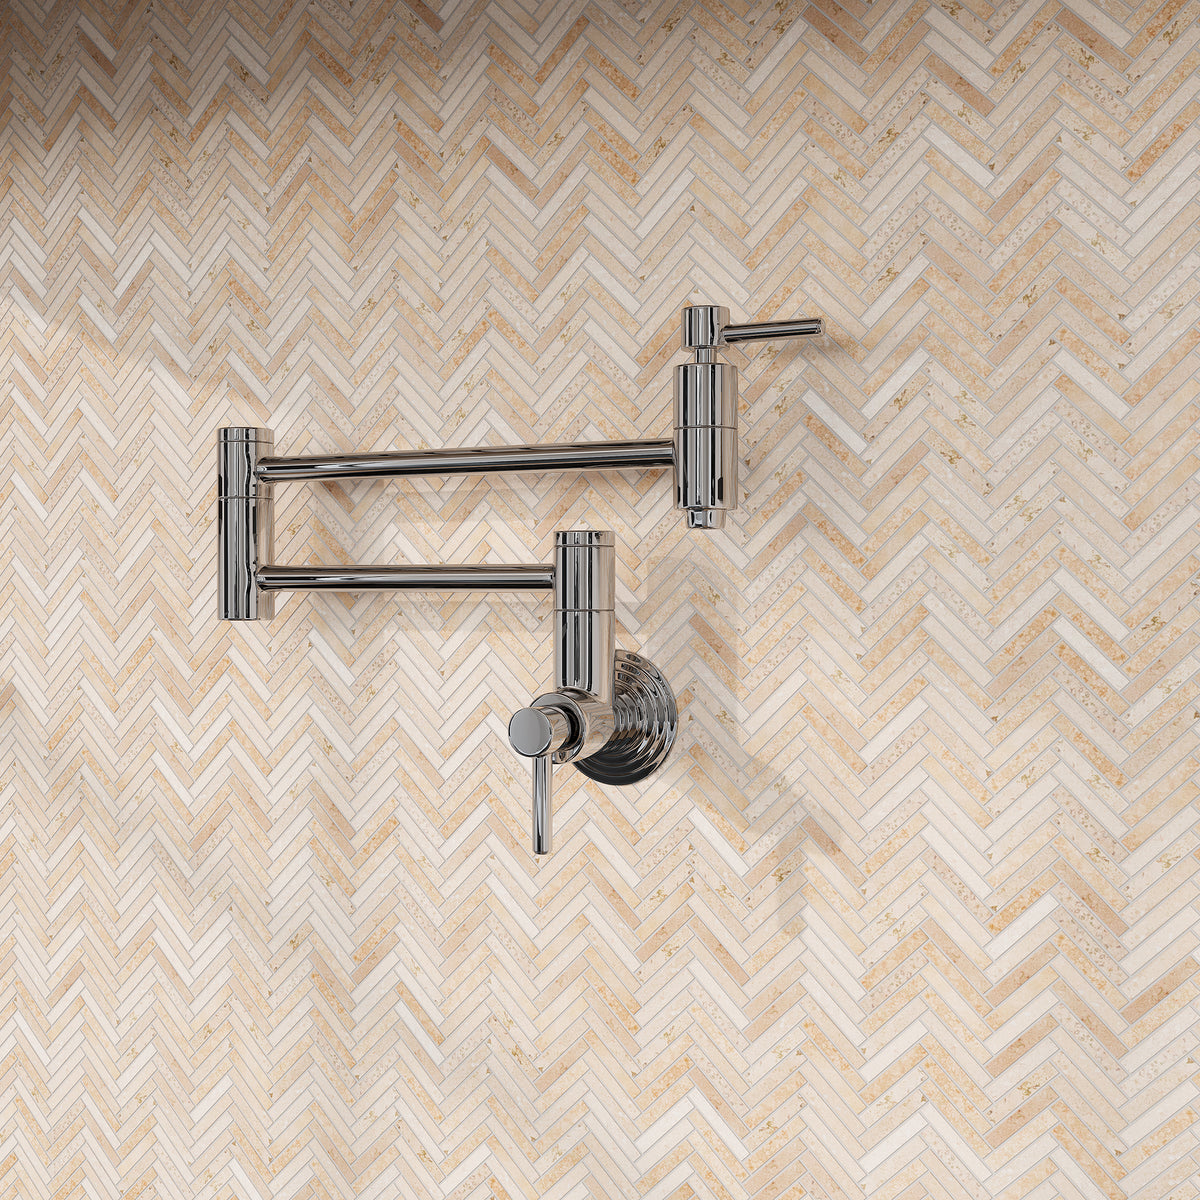 Shown in Vintage Travertine Main Product Slider View